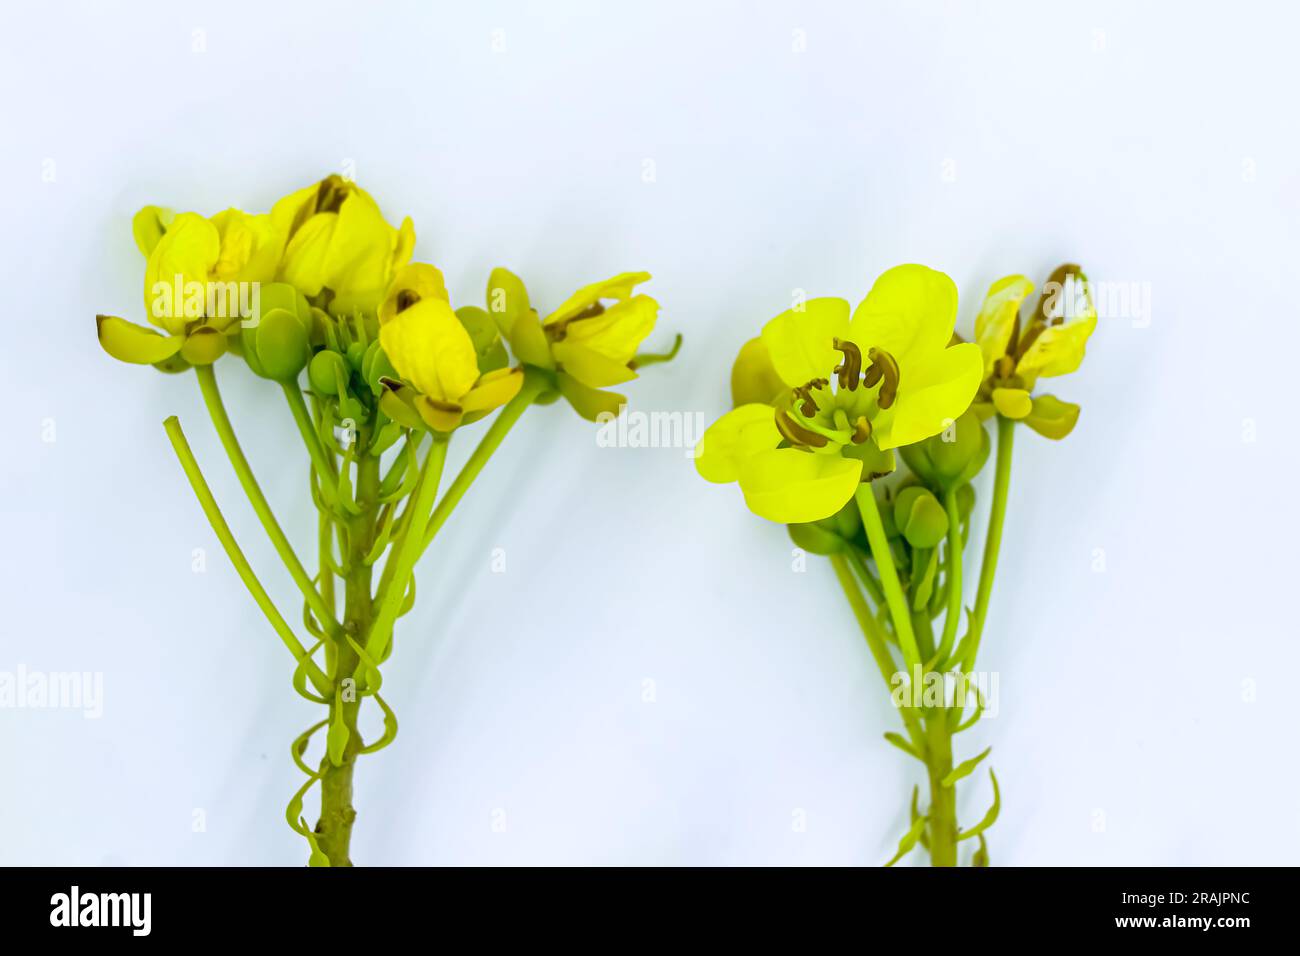 Yellow Small Flower on a White Background, Vibrant Yellow Small Flower Blossoms on a Crisp White Canvas Stock Photo